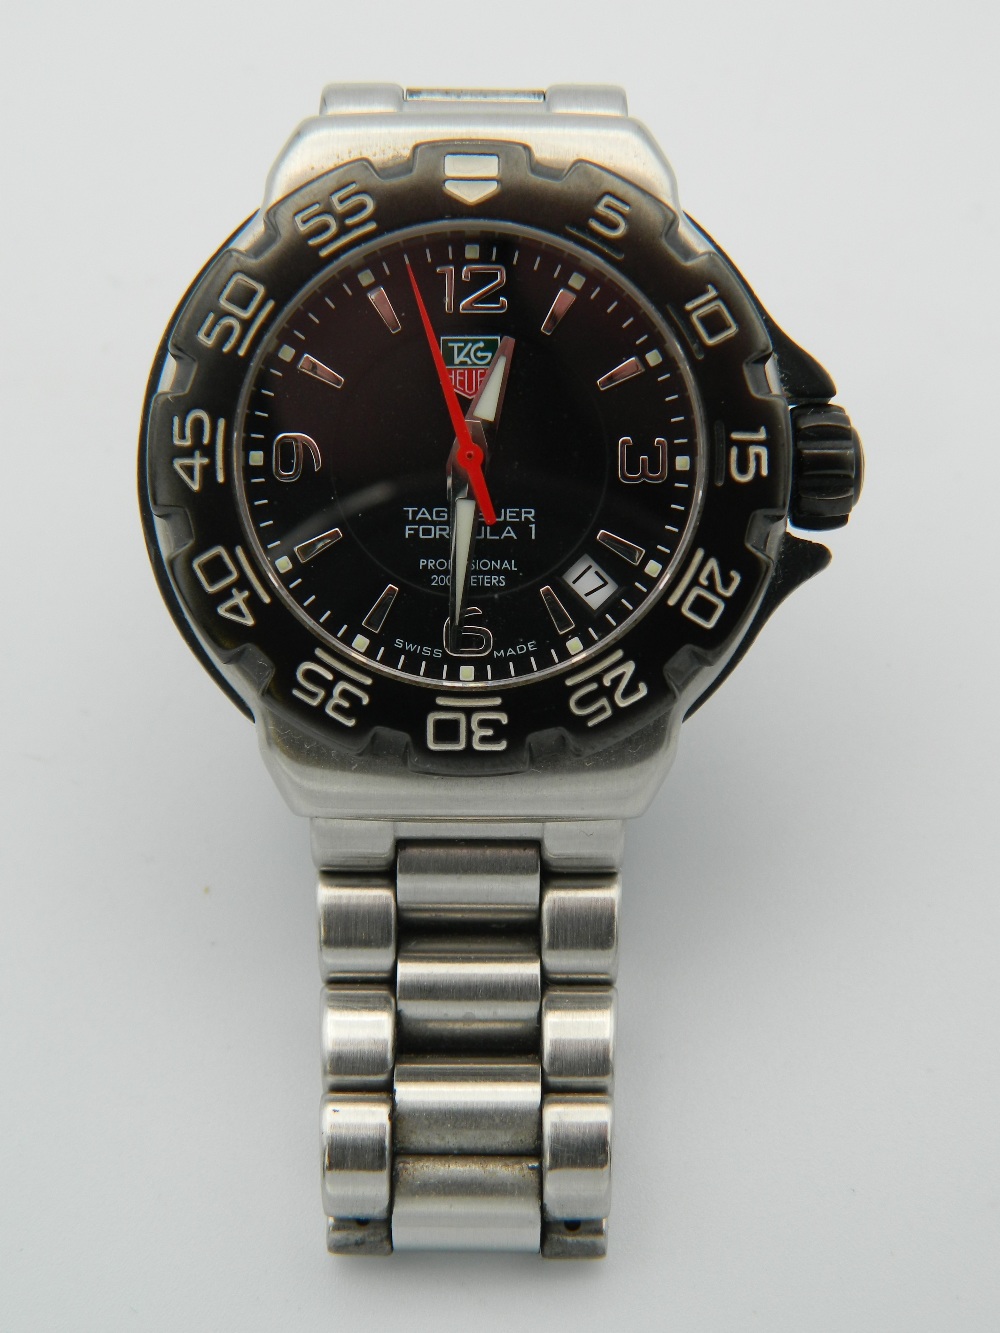 A Tag Heuer Formula 1 watch, - Image 3 of 3